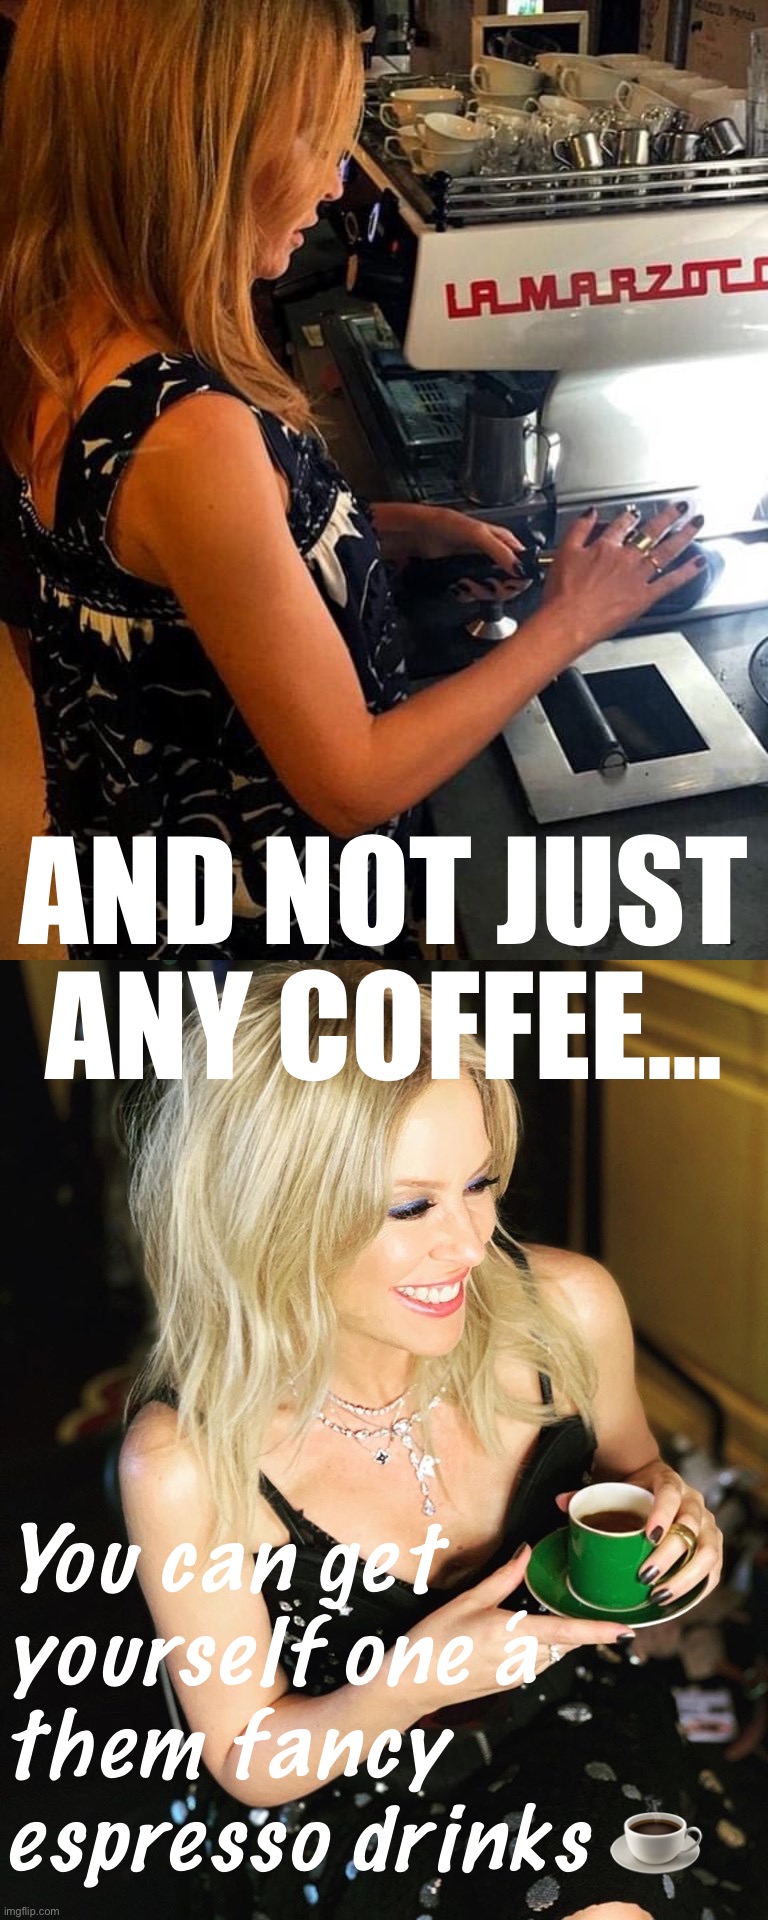 Most people’s follower count, plus $5, could get them a Starbucks | AND NOT JUST ANY COFFEE... You can get yourself one ‘a them fancy espresso drinks ☕️ | image tagged in kylie coffee,kylie coffee 2 | made w/ Imgflip meme maker